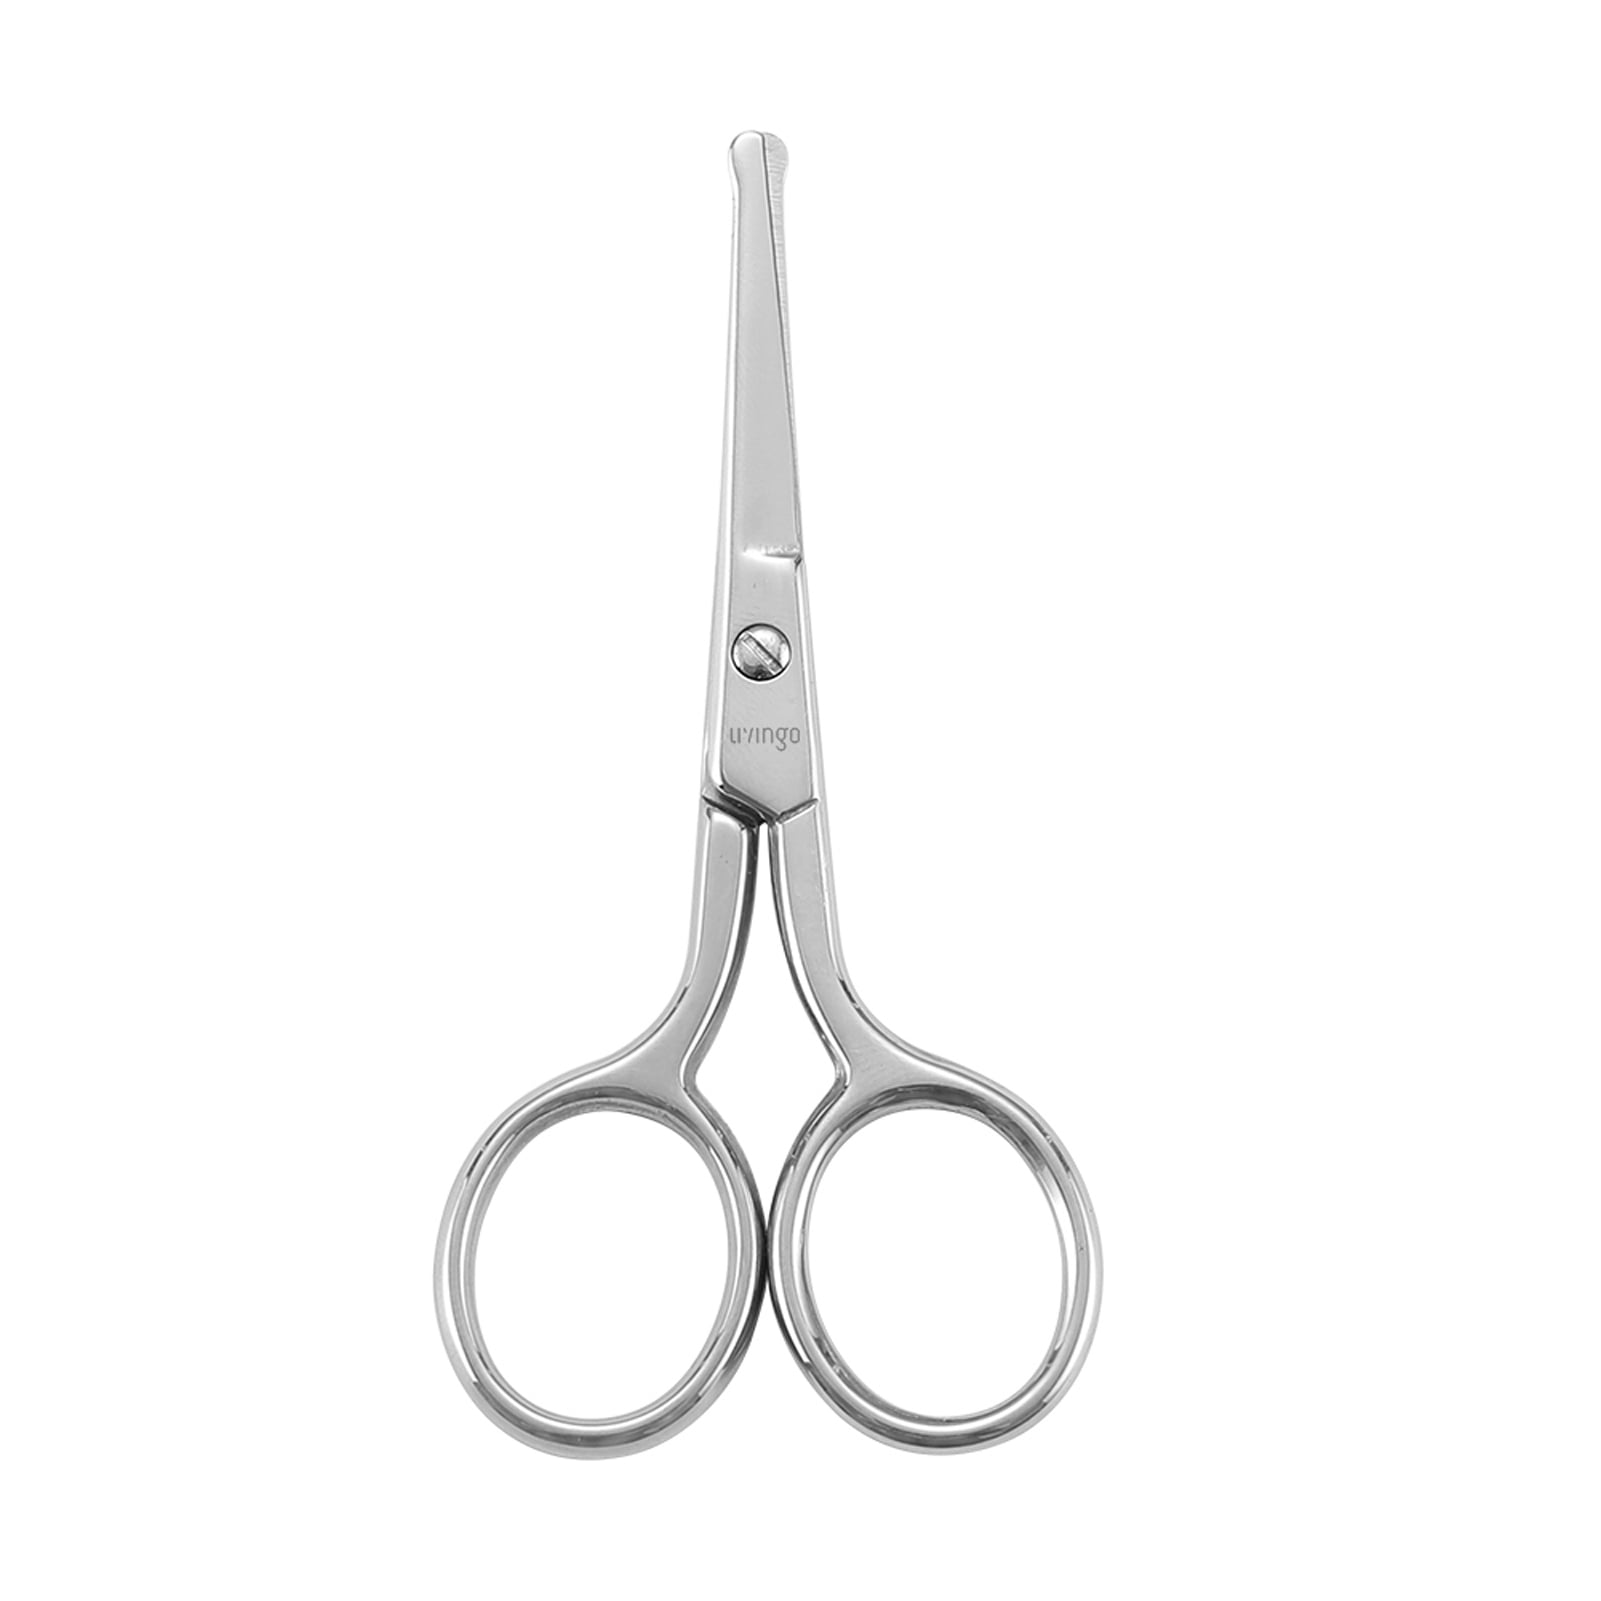 Small Scissors Eyebrow Scissors Professional Small Ear Nose Hair Scissors,  Curved and Safety Sharp Tip Grooming Beauty Tools - AliExpress